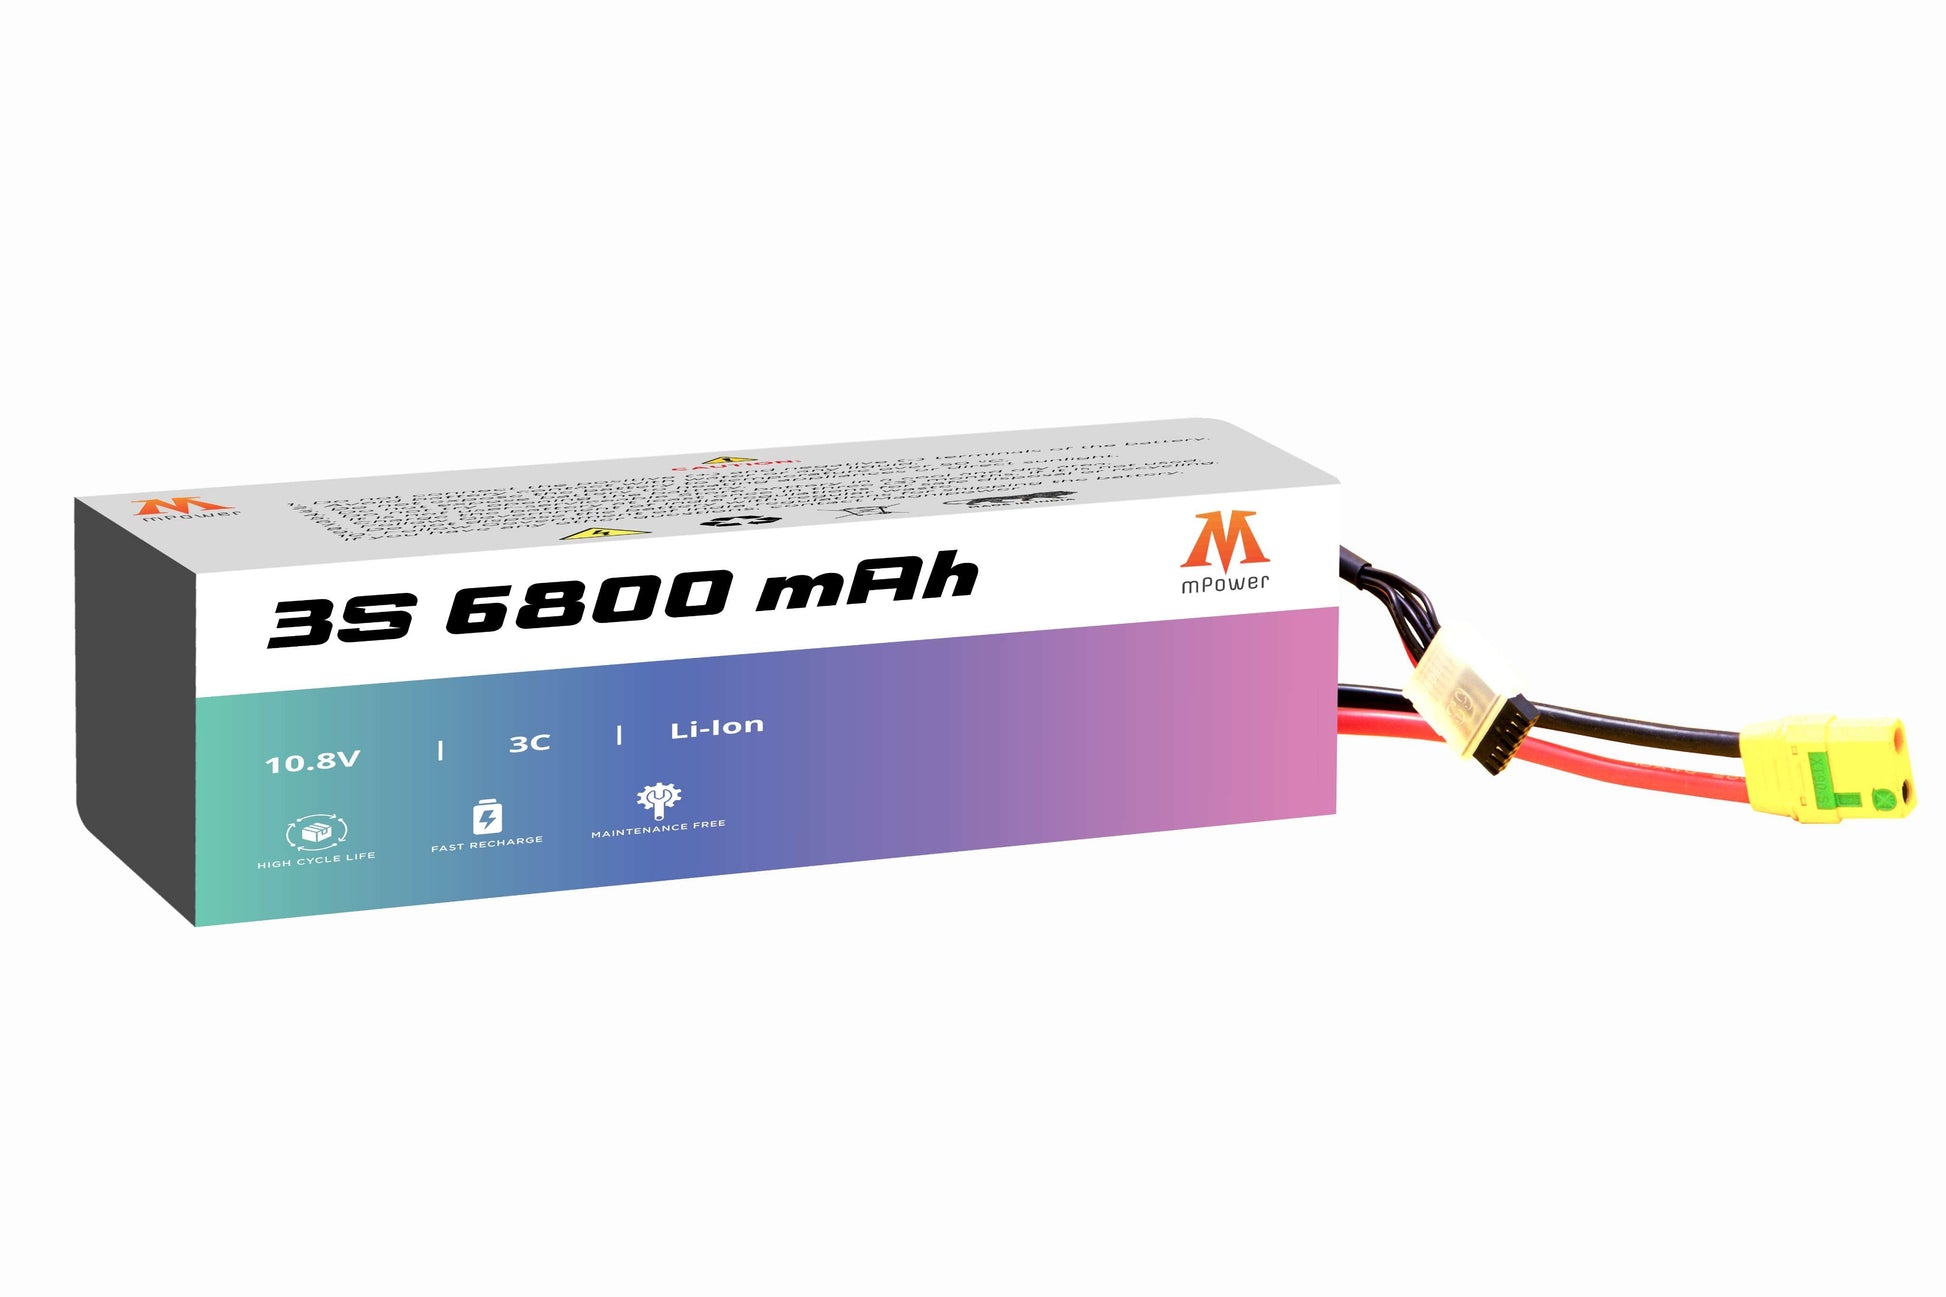 mPower 3S 6800mAh Lithium-Ion Battery for Survey Drones-mpowerlithium